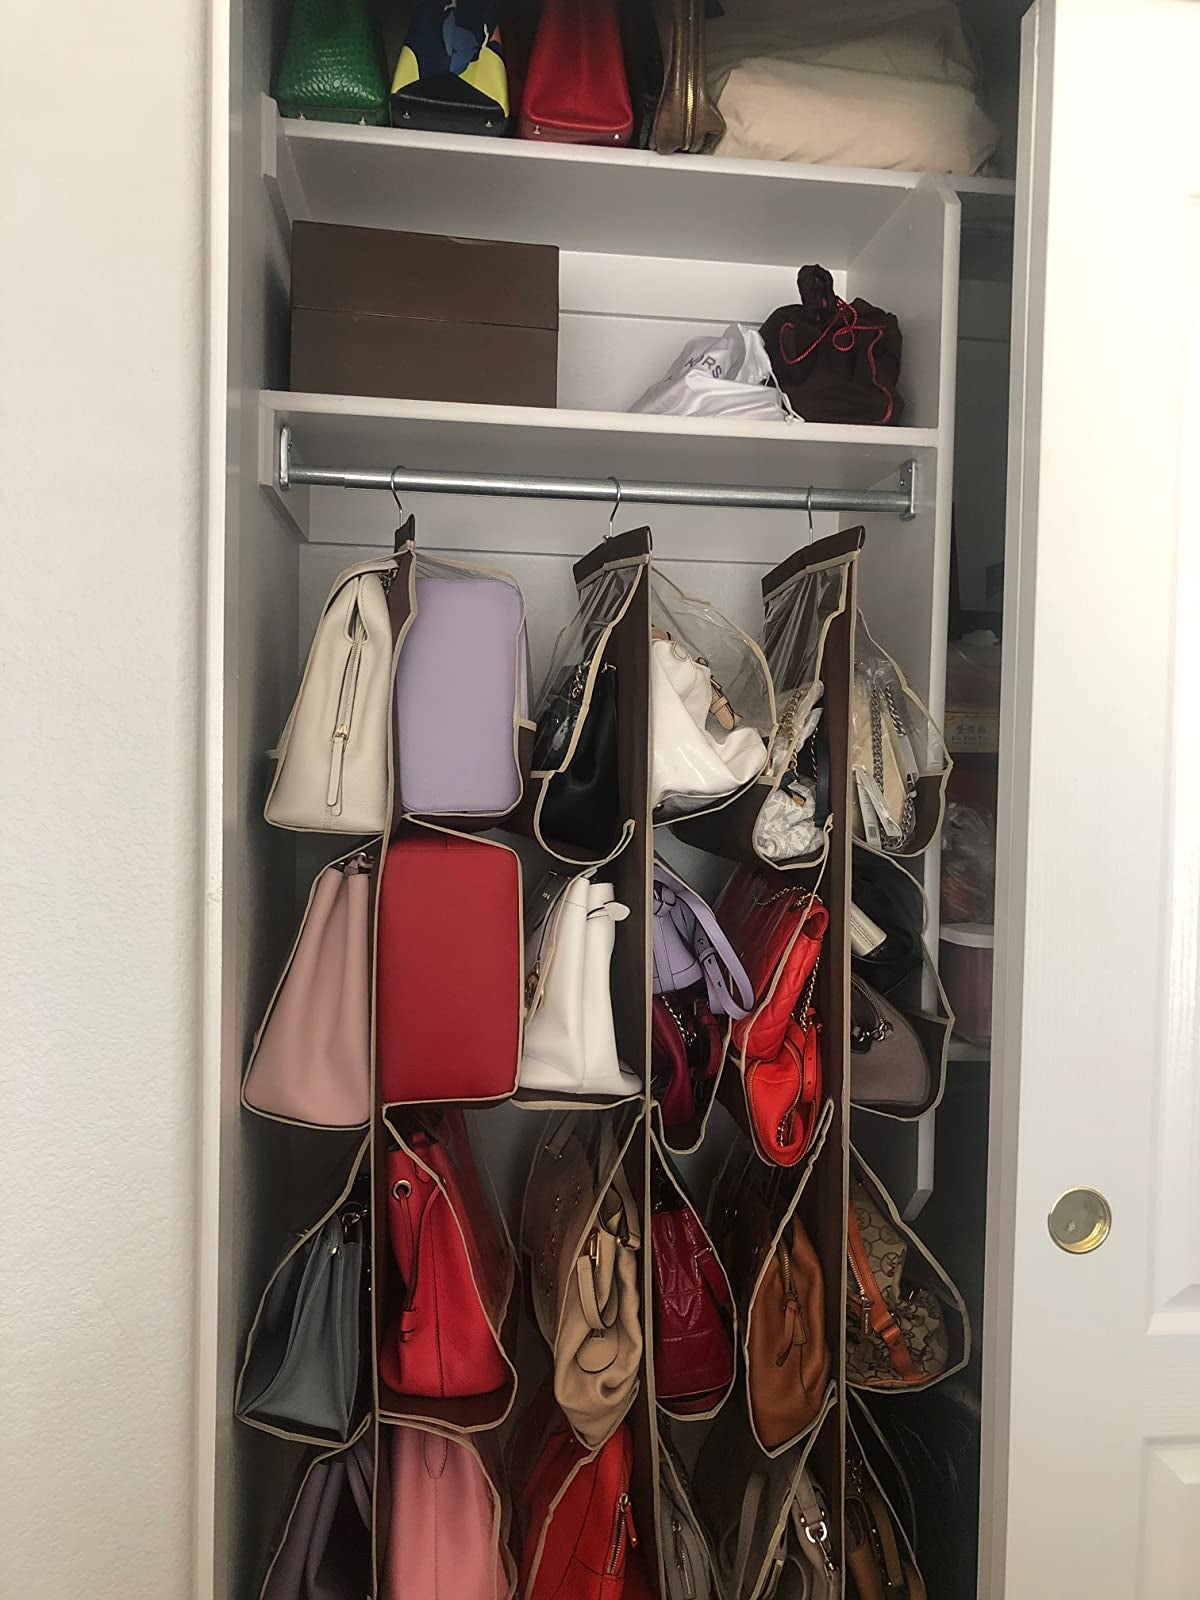 How to Store Winter Clothes and Find More Closet Space